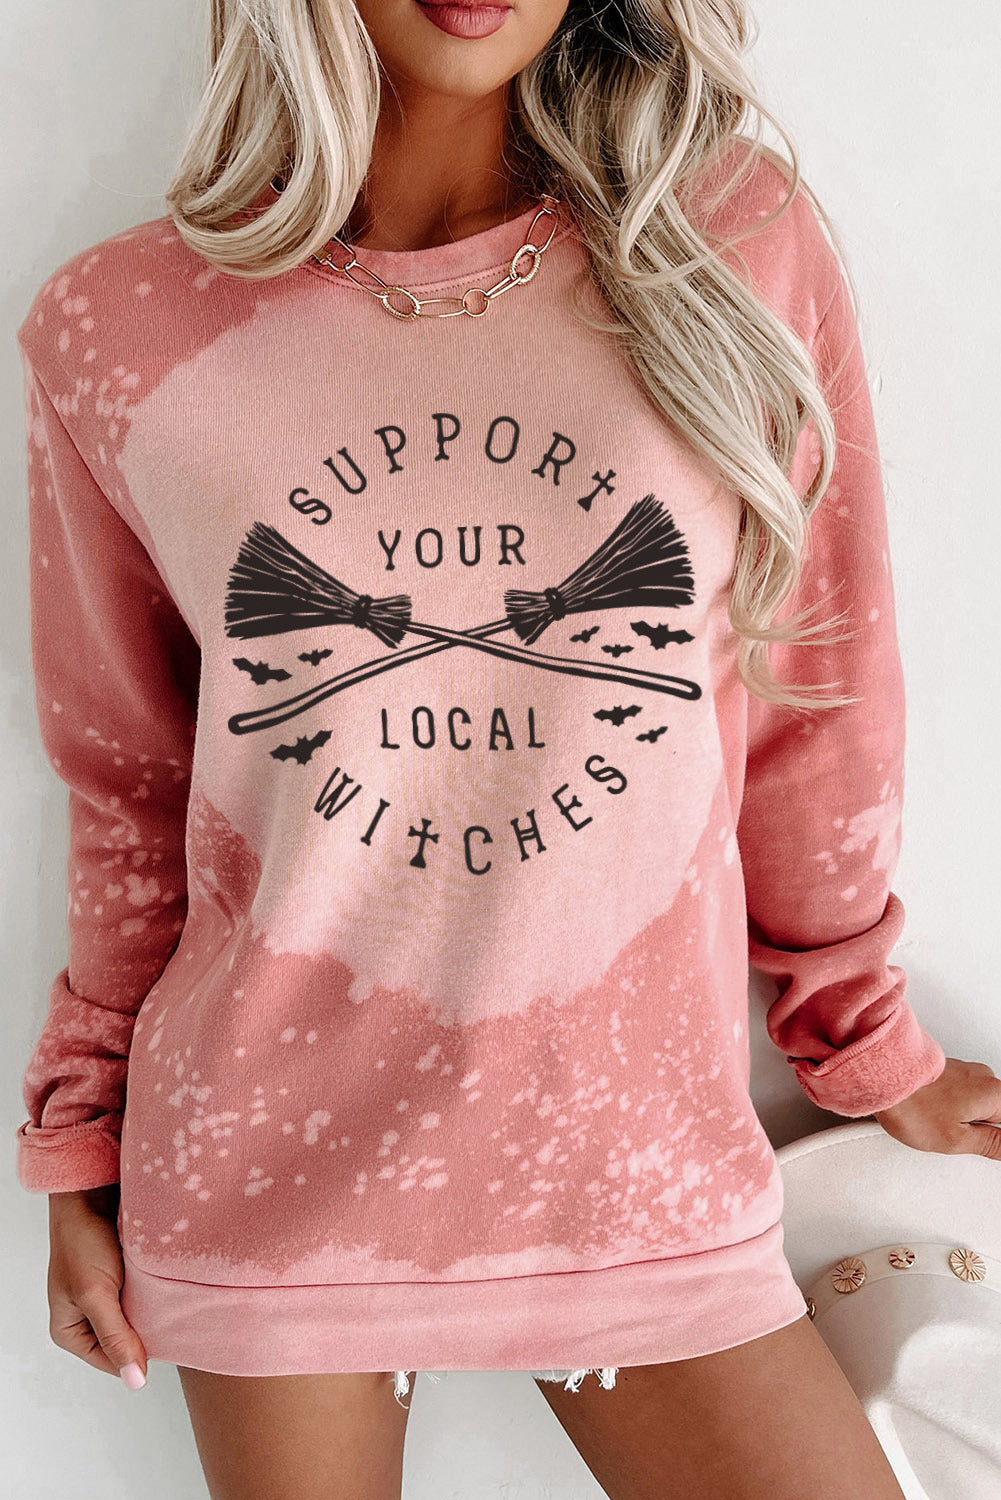 SUPPORT YOUR LOCAL WITCHES Graphic Sweatshirt - Pink / S - T-Shirts - Shirts & Tops - 1 - 2024